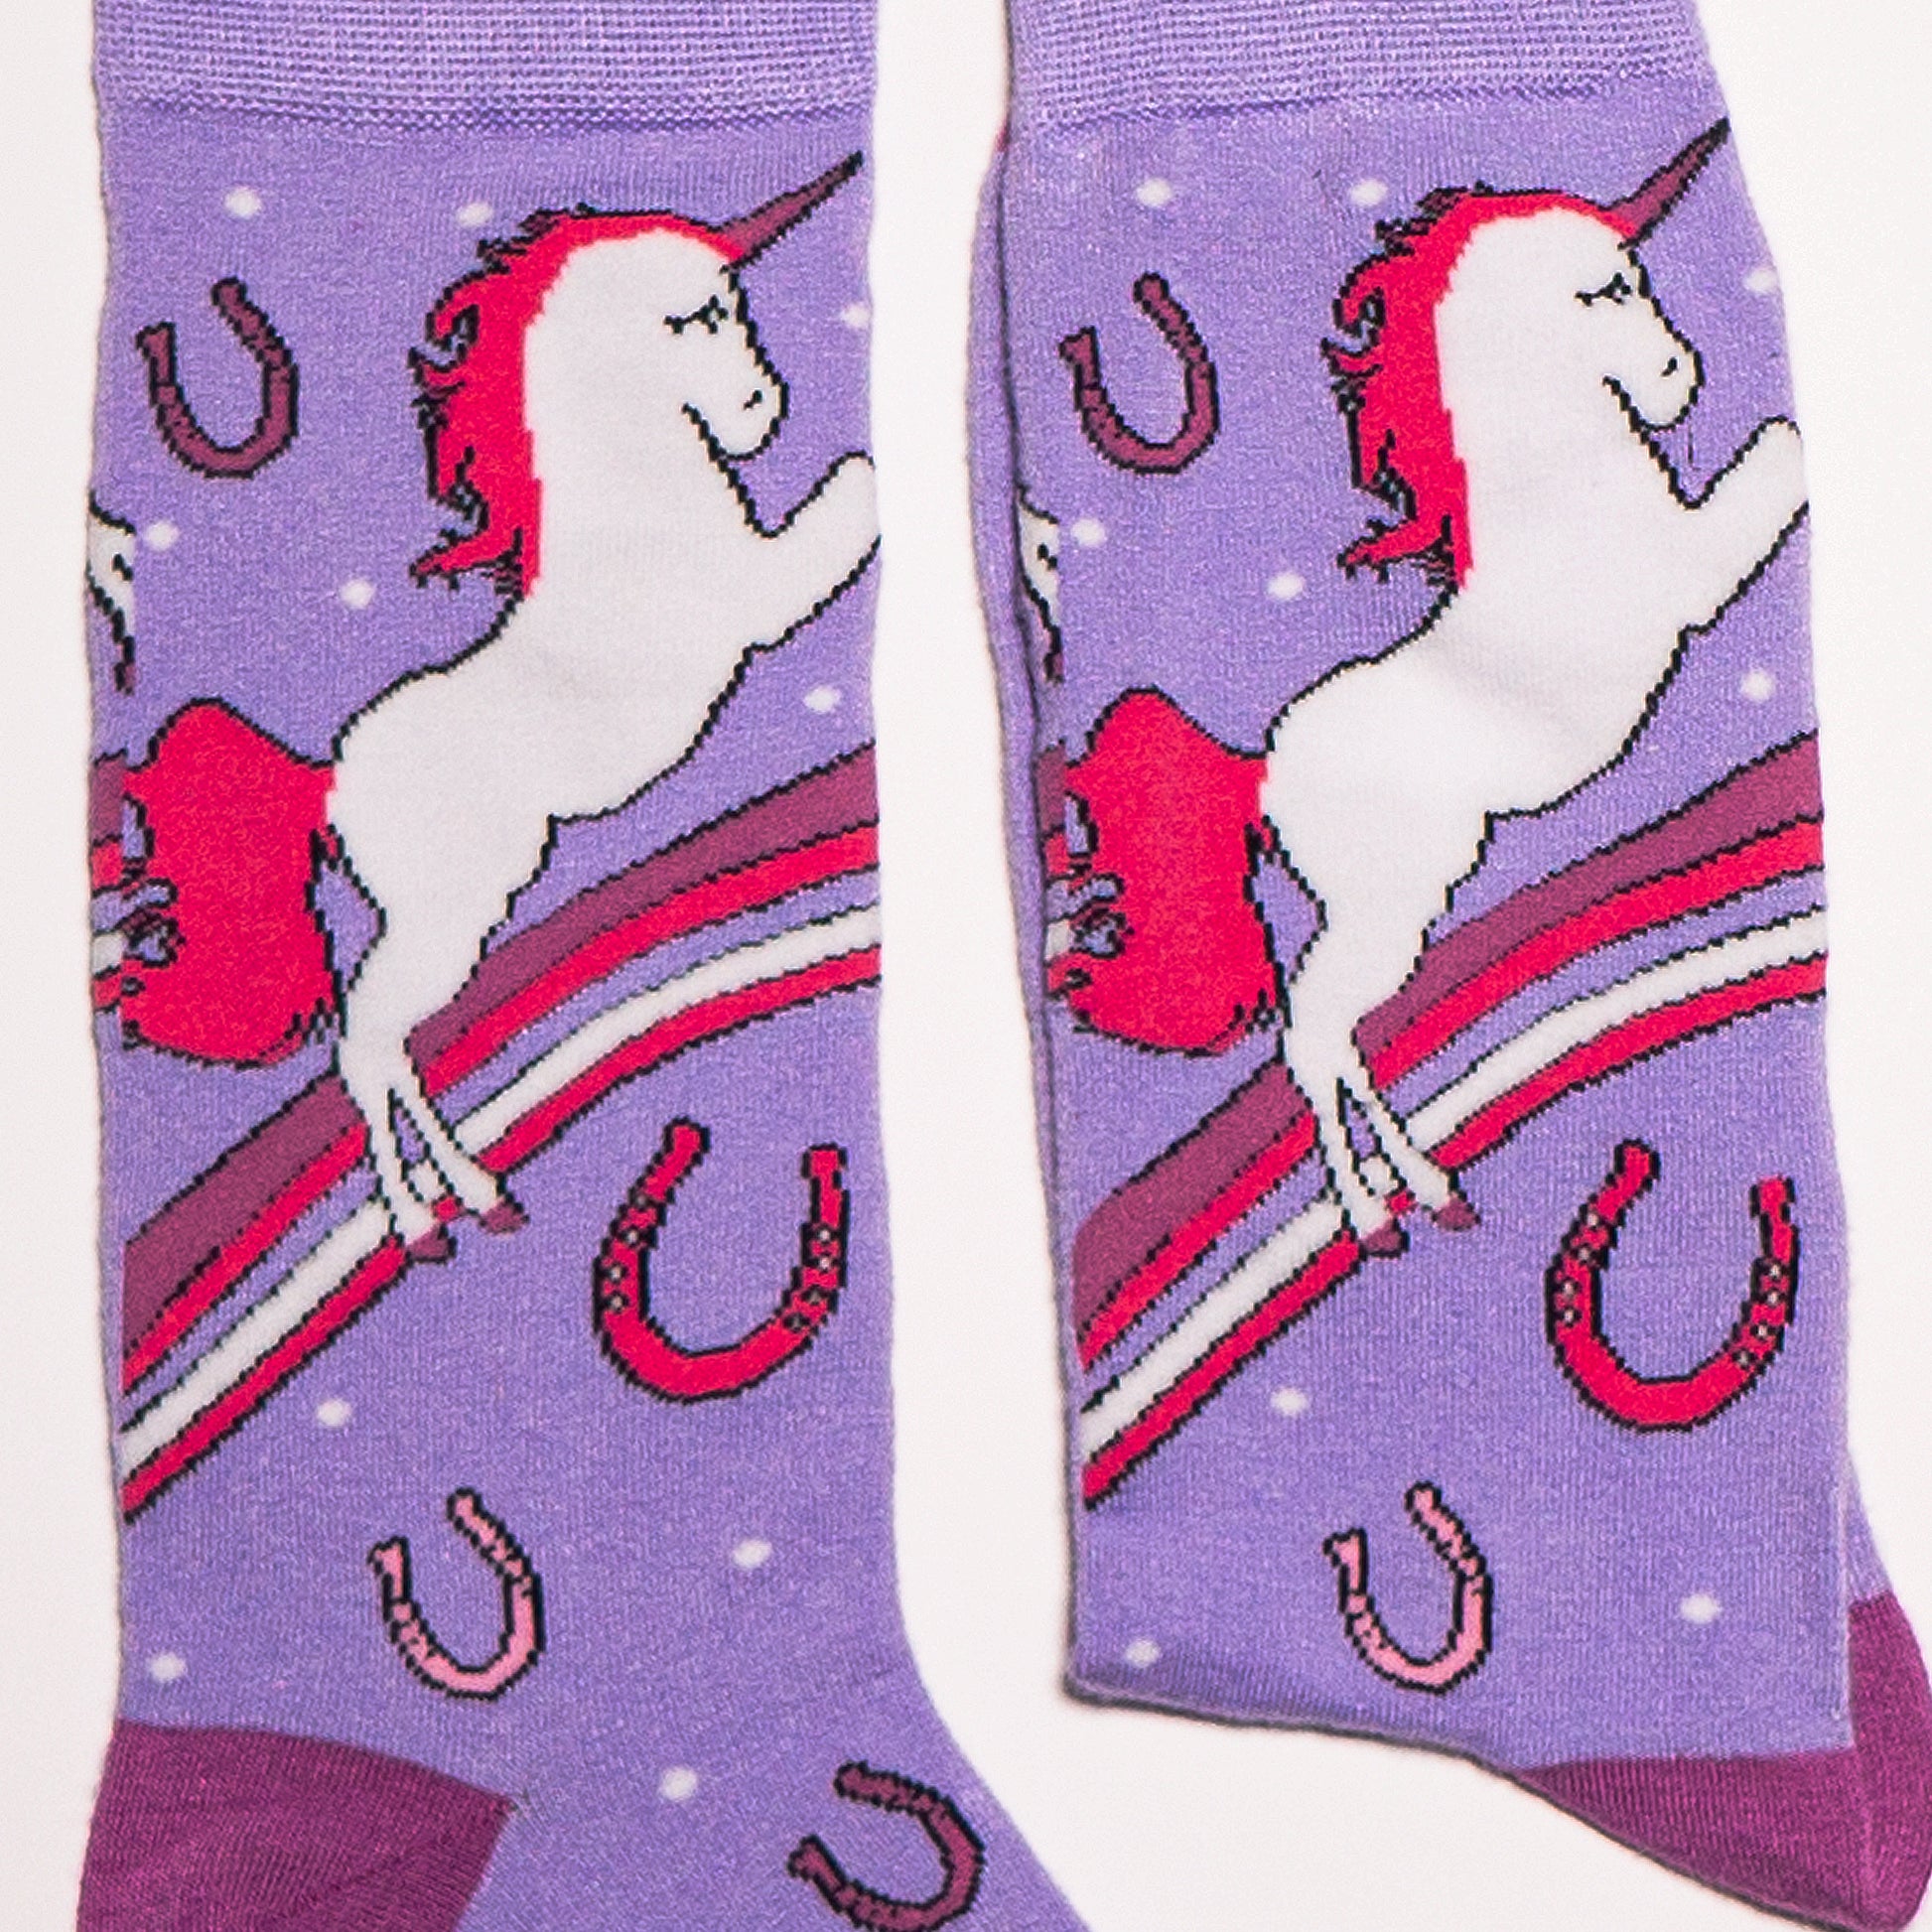 Unicorns, rainbows, horseshoes and fantastical attitude. Perfect shades of pink and purple muddled together make these socks must haves. Soft. Strong. Sustainable. Comfortable.   Available in US Men’s 4-8